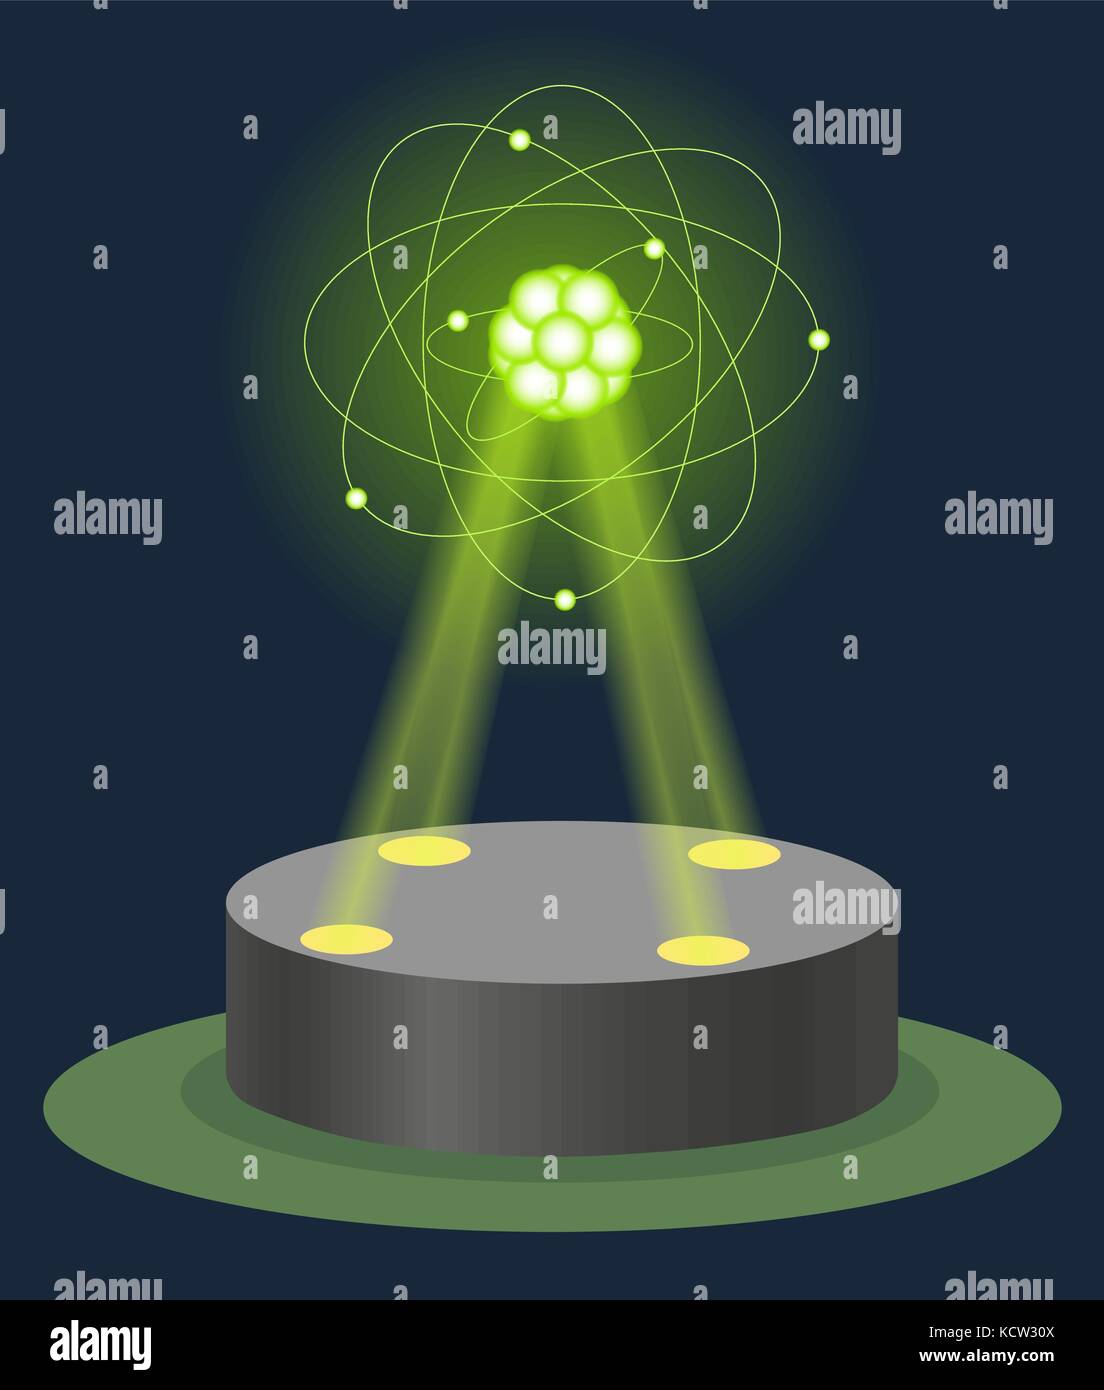 Innovation museum carbon atom structure hologram on illuminated pedestal. Future technology physics and chemistry lesson education. Virtual show vecto Stock Vector